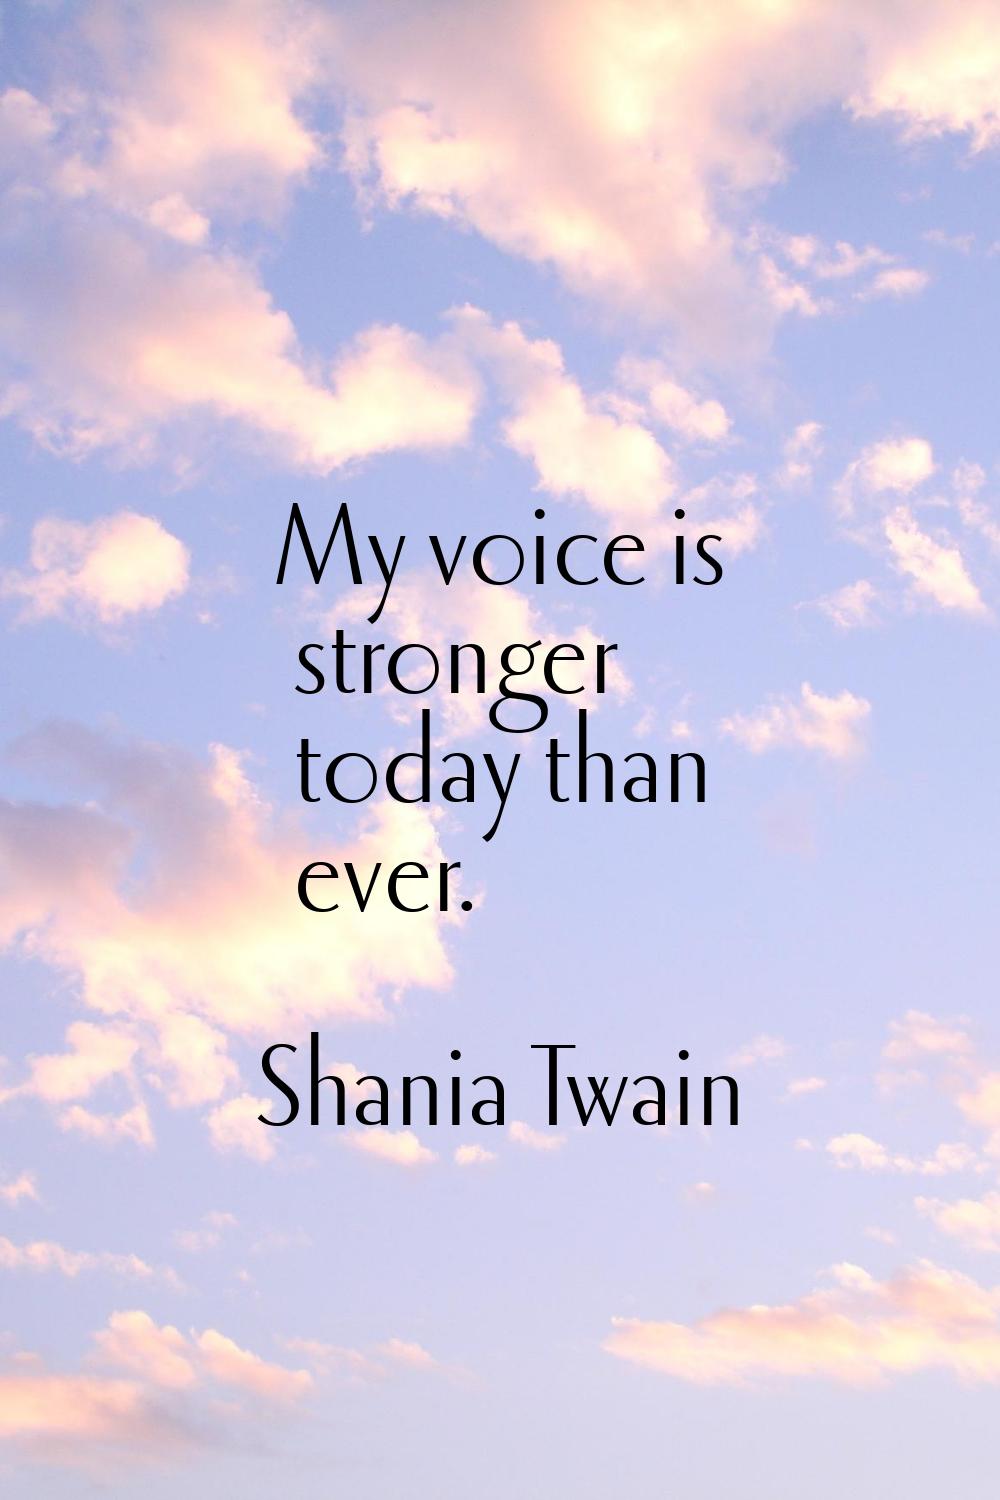 My voice is stronger today than ever.